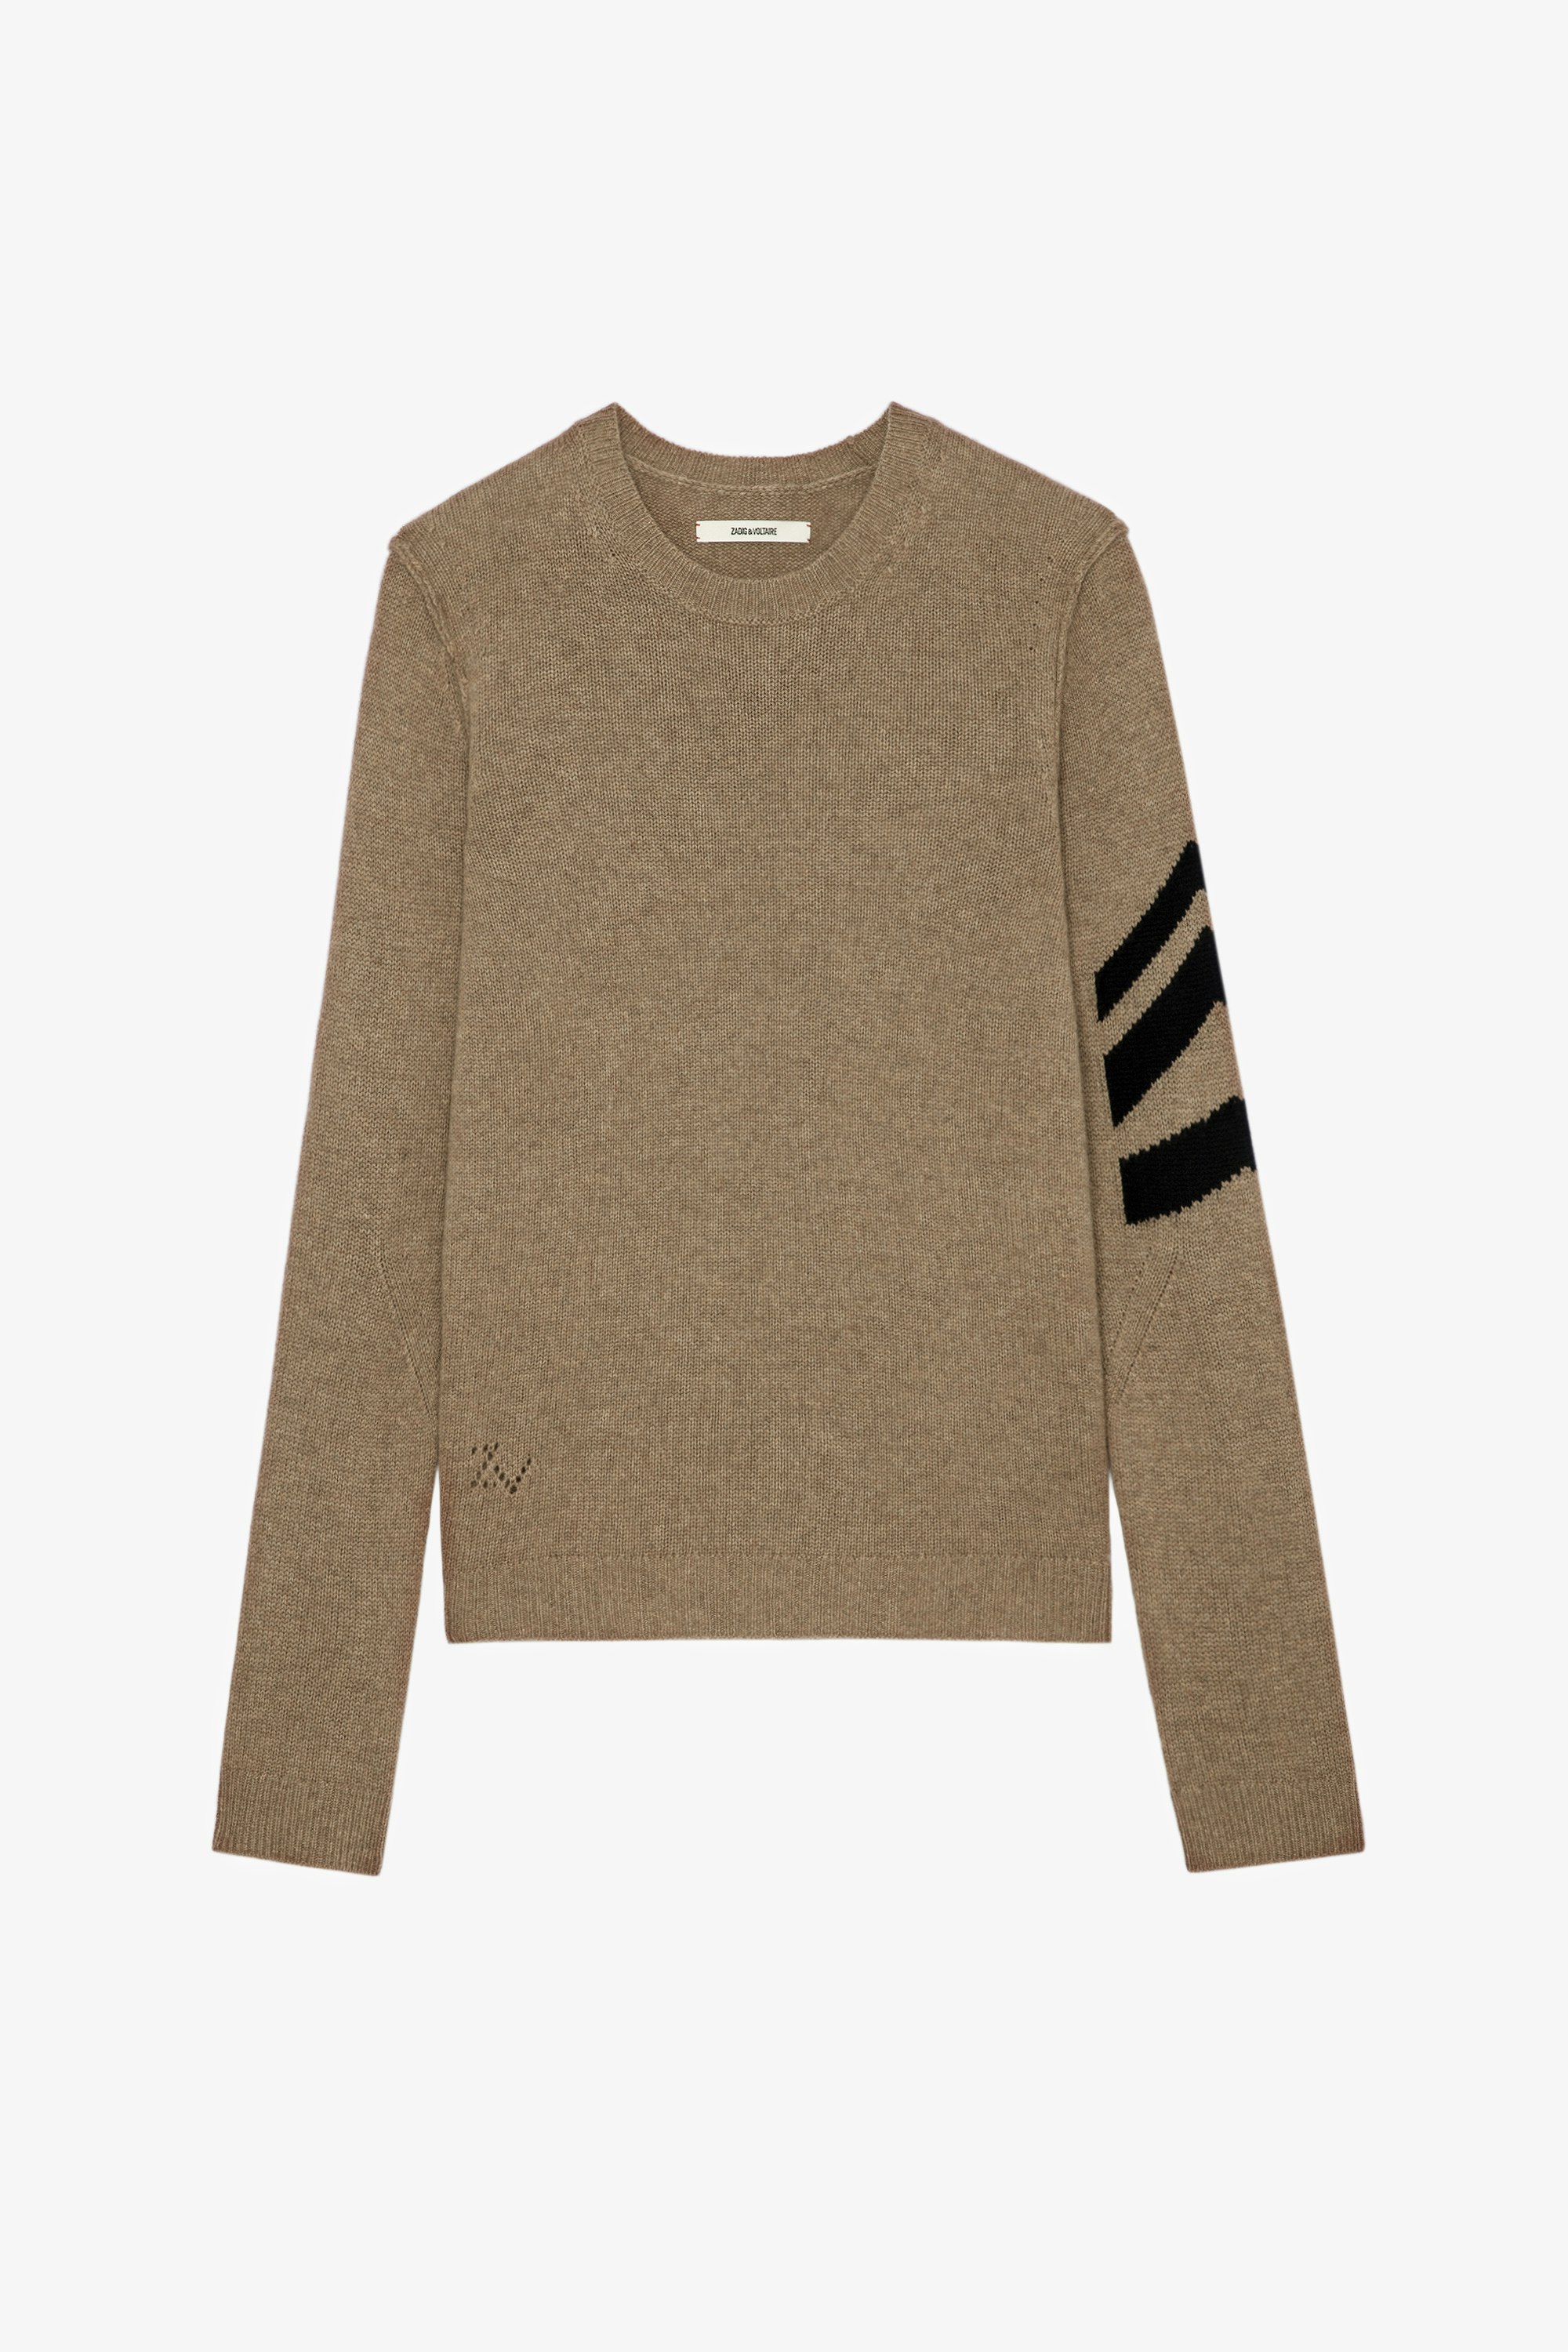 Kennedy Arrow カシミヤニット Men’s cognac cashmere jumper featuring arrows on the sleeve